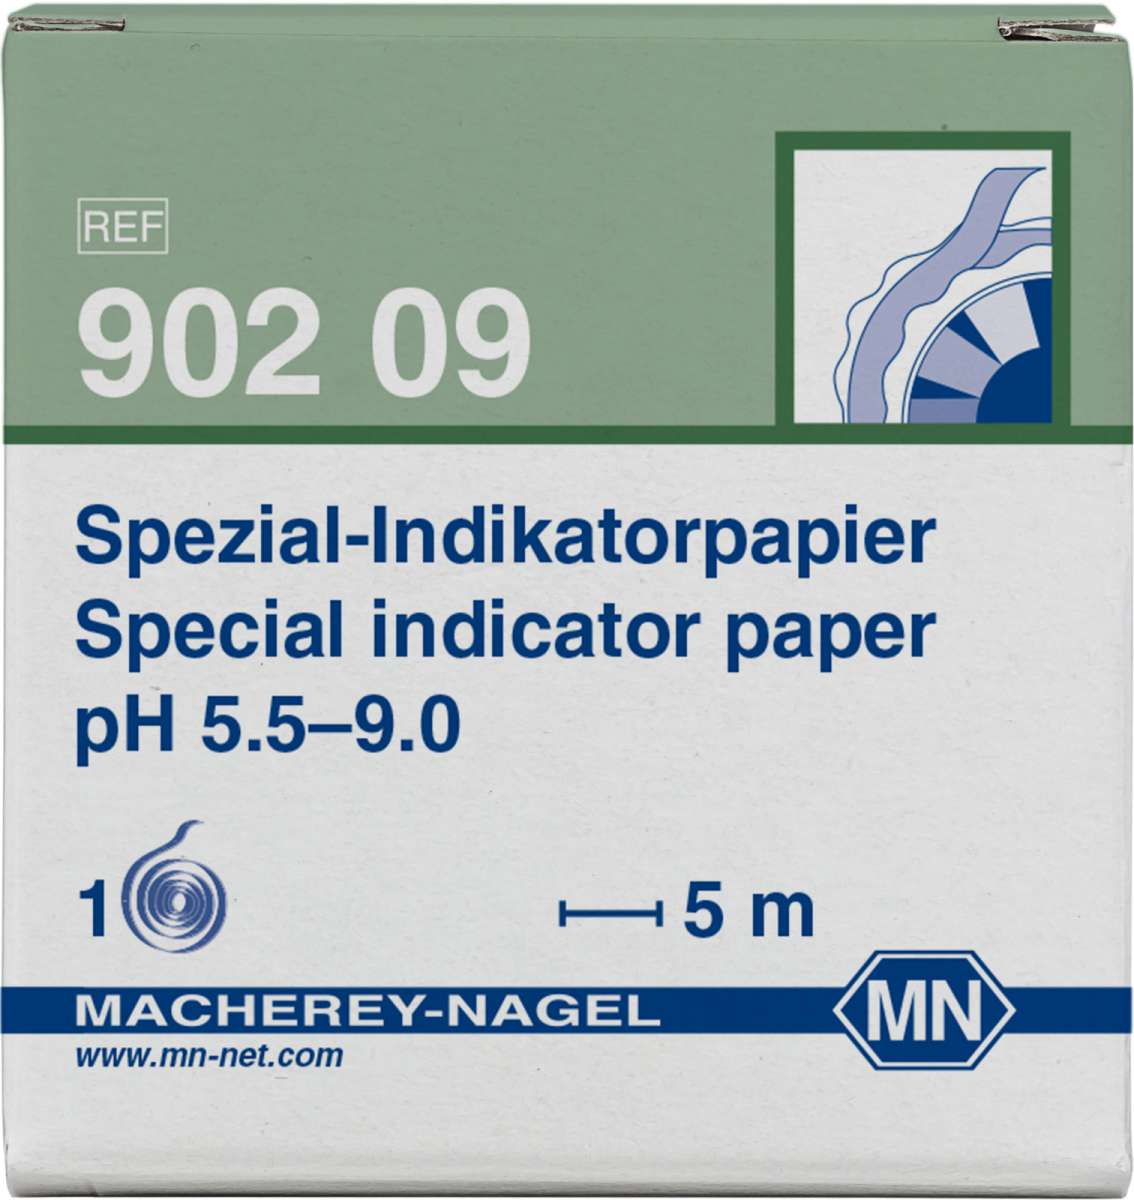 Refill pack for Special indicator paper pH 5.5 to 9.0 (3 reels of 5m length and 7mm width)